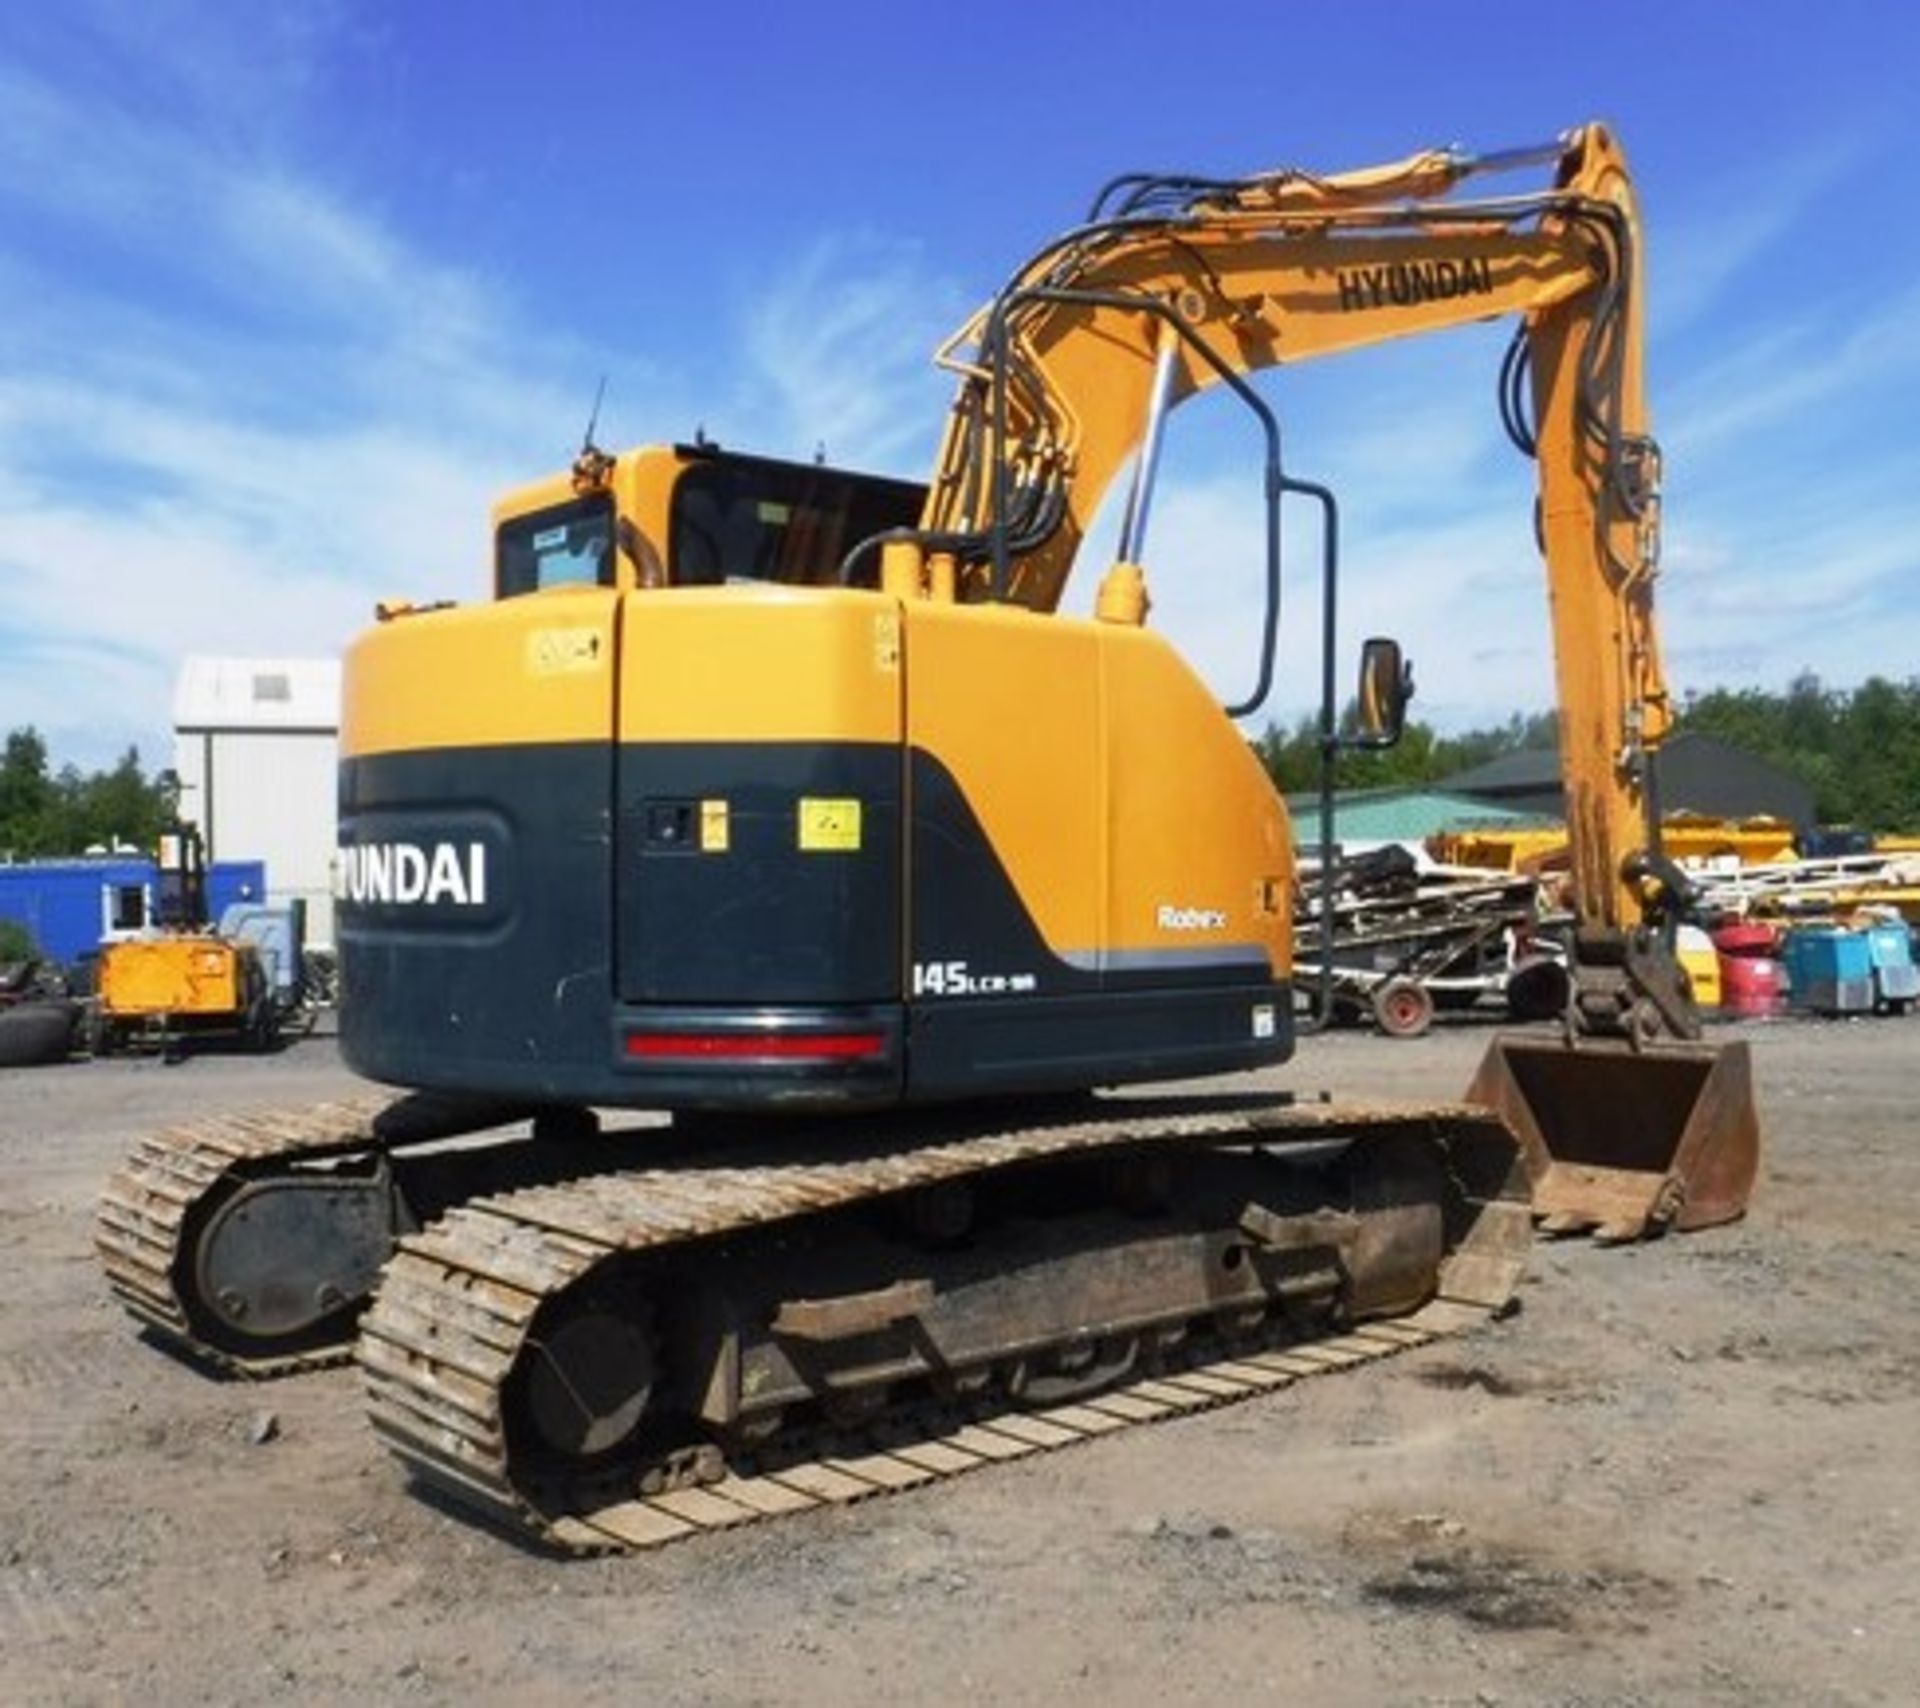 2014 HYUNDAI 145-9A excavator c/w 1 bucket. Short body version ideal for site work. s/n 068. 4263hr - Image 23 of 32